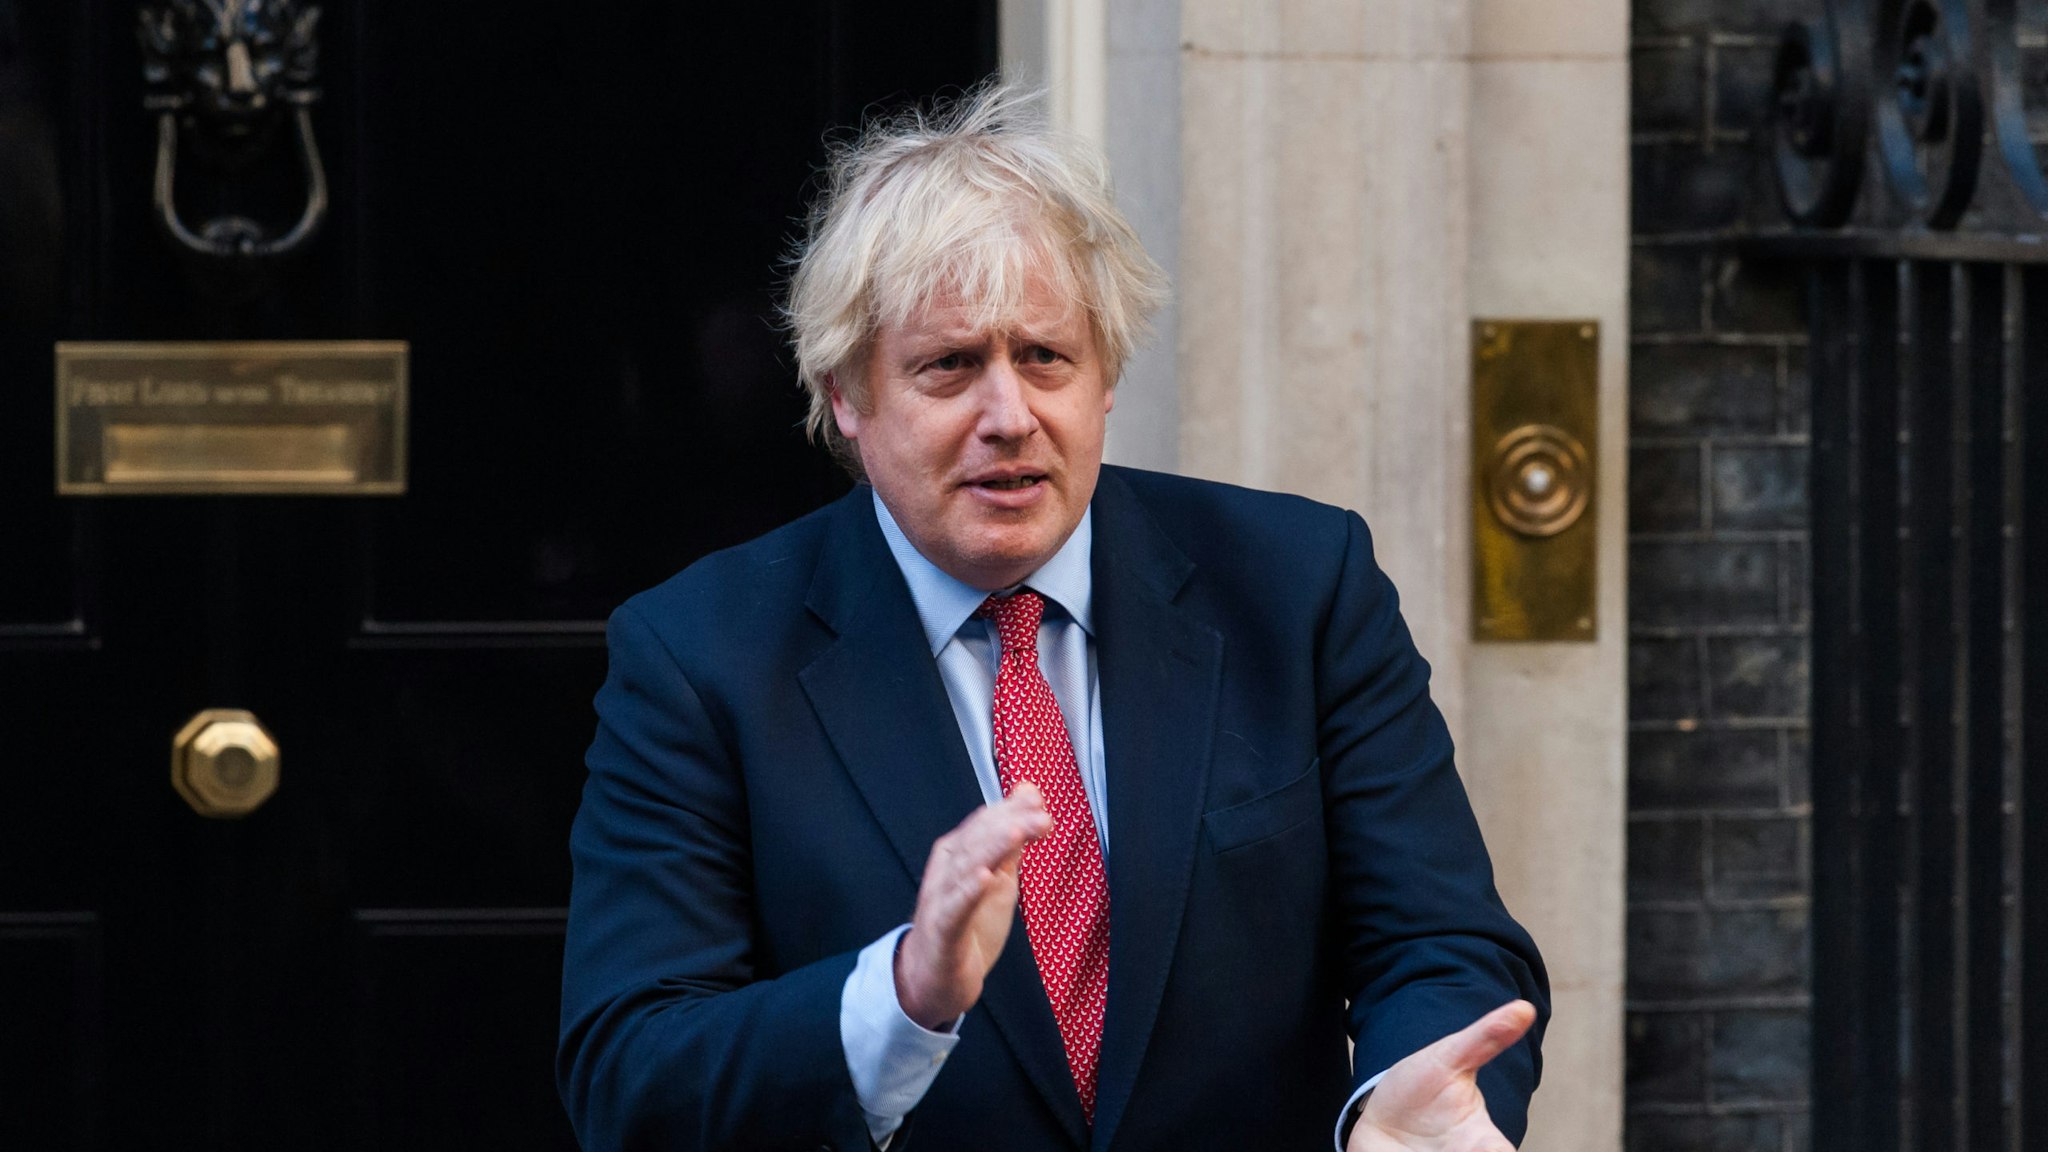 British Prime Minister Boris Johnson claps his hands outside 10 Downing Street during the weekly 'Clap for our Carers' applause for the NHS and key workers on the front line of the coronavirus (Covid-19) pandemic on 28 May, 2020 in London, England. The founder of the event, Ms Annemarie Plas, suggested that after the 10th applause this week, the show of appreciacion should be made an annual event to avoid it being politicised. (Photo by WIktor Szymanowicz/NurPhoto via Getty Images)